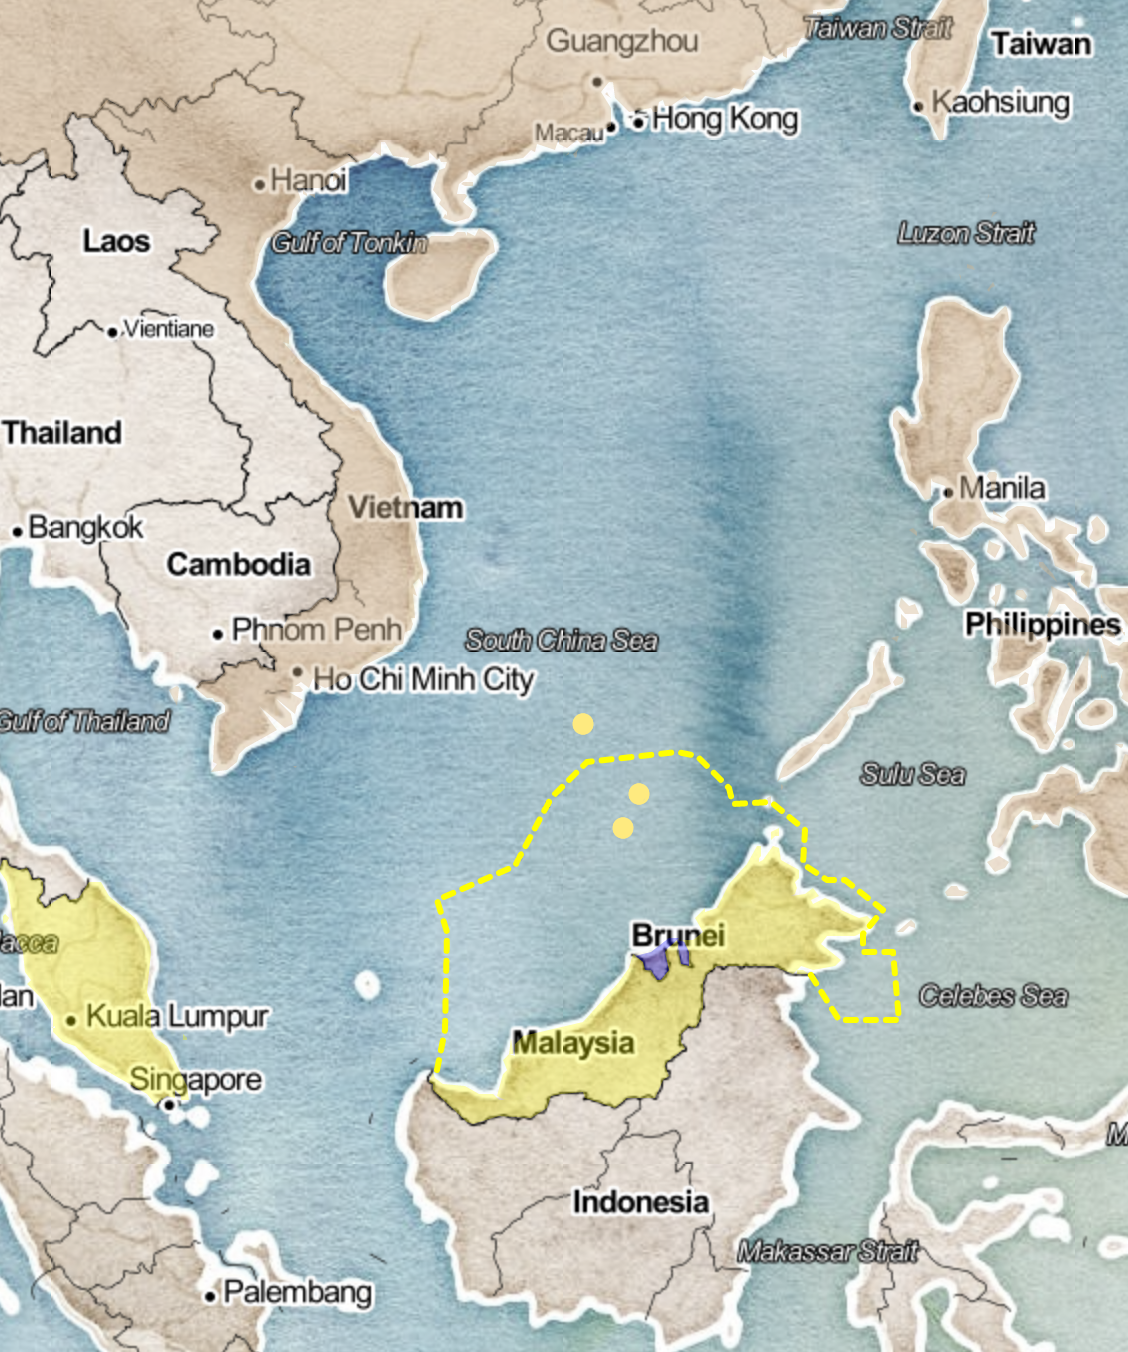 Map of Malaysia's claims in the South China Sea